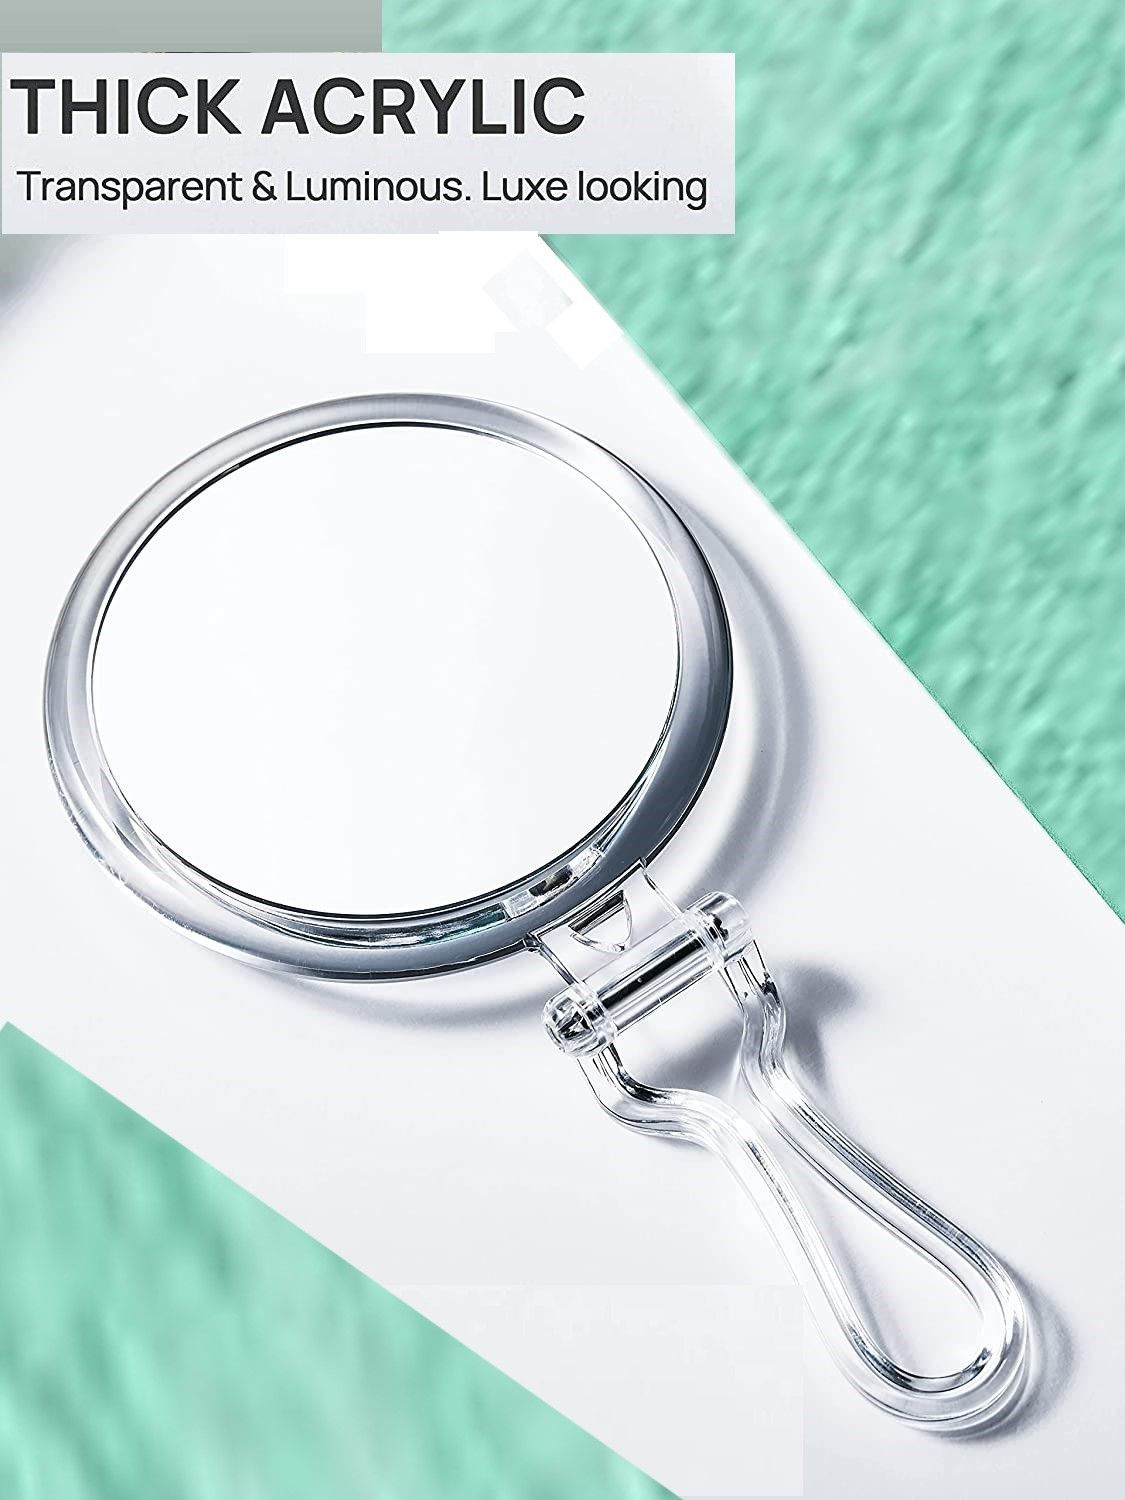 Double-Sided 1X/10X Magnifying Foldable Makeup Mirror For Handheld